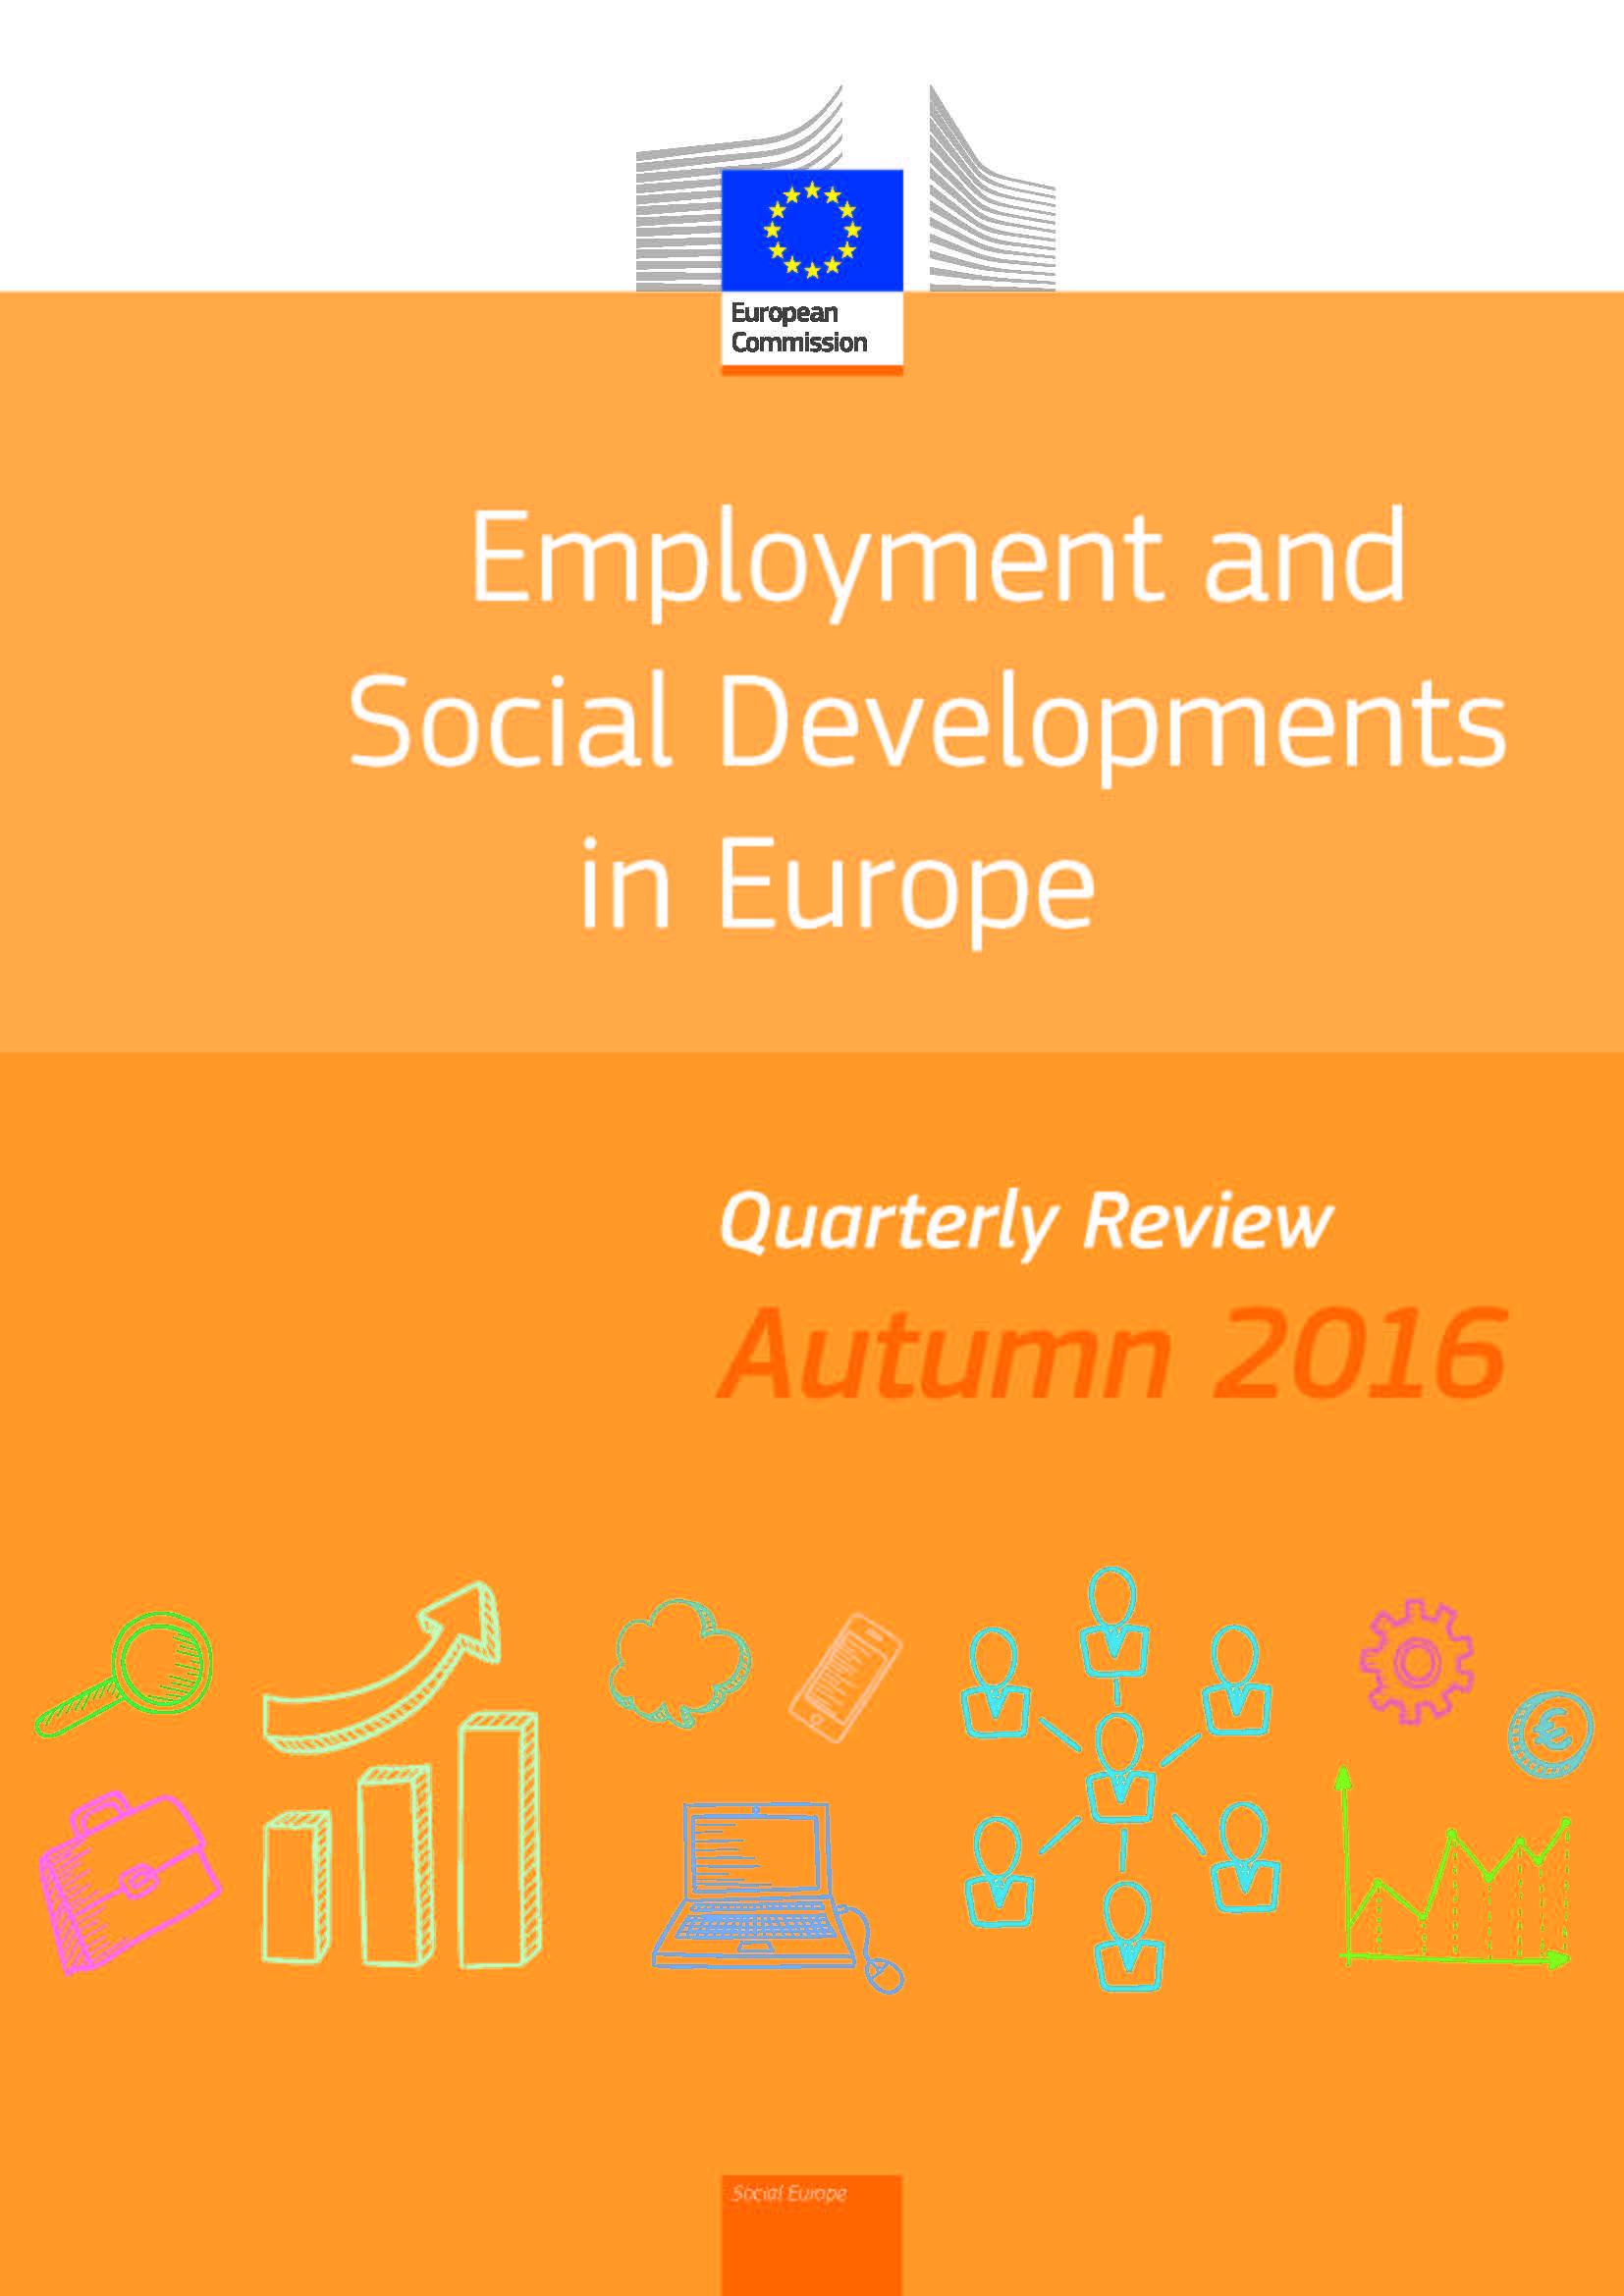 Employment and Social Developments in Europe - Quarterly Review - Autumn 2016 